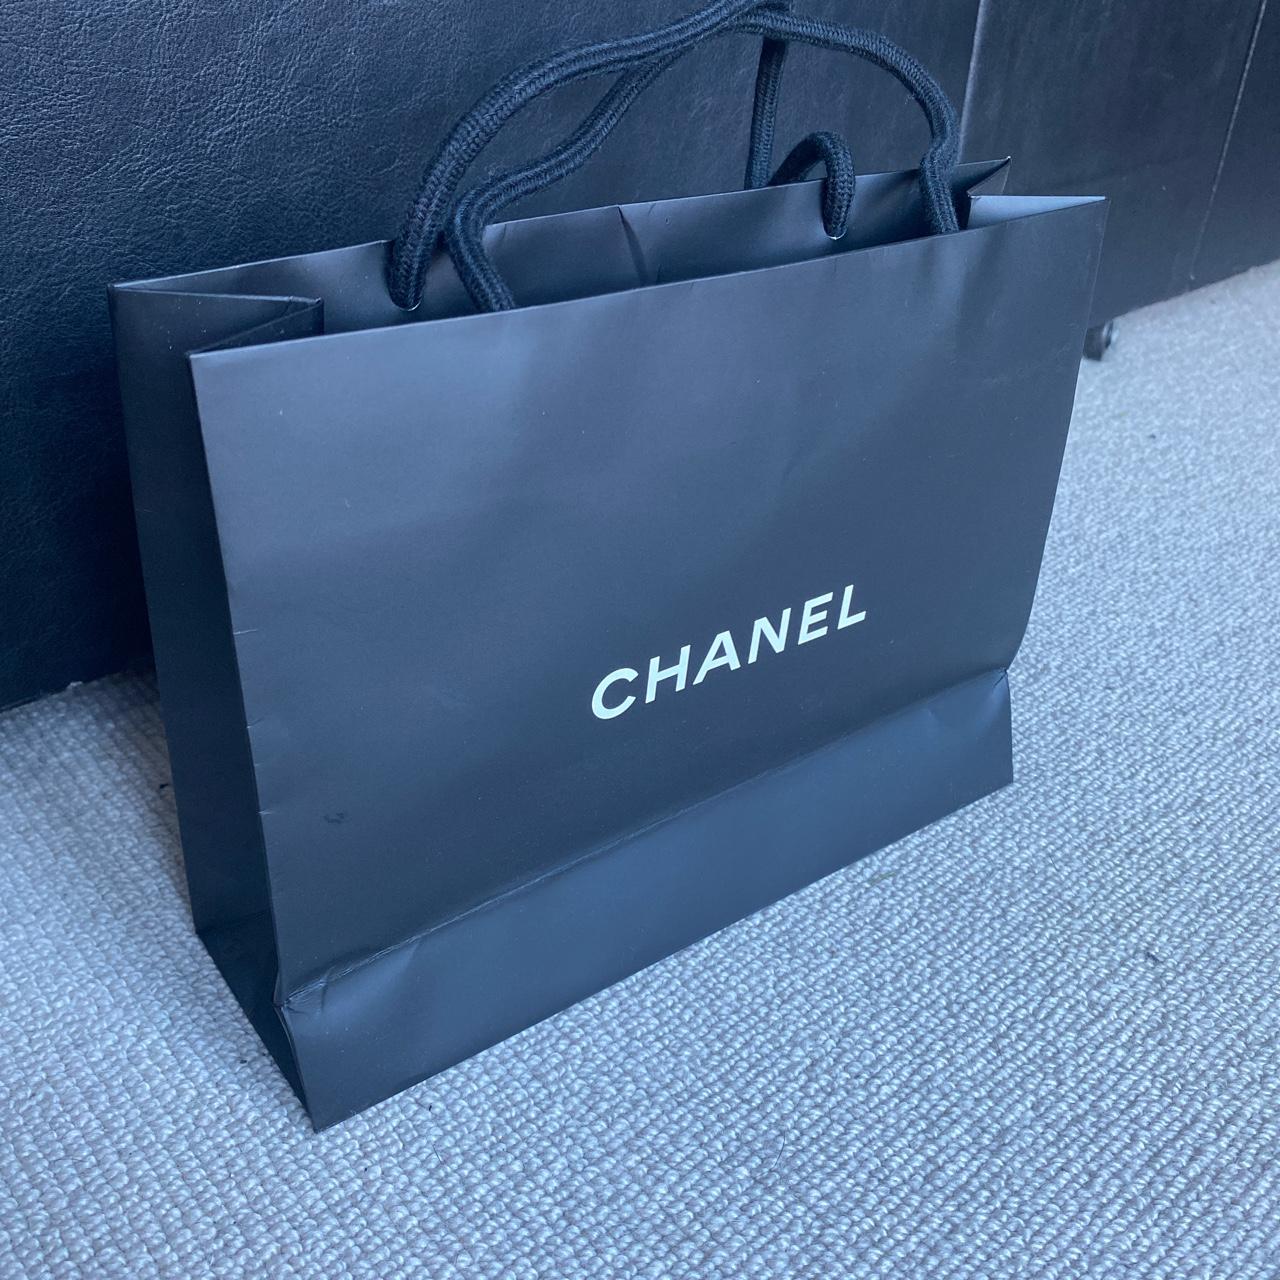 Chanel gifts bag . Size 5.5x4.4x2. Included